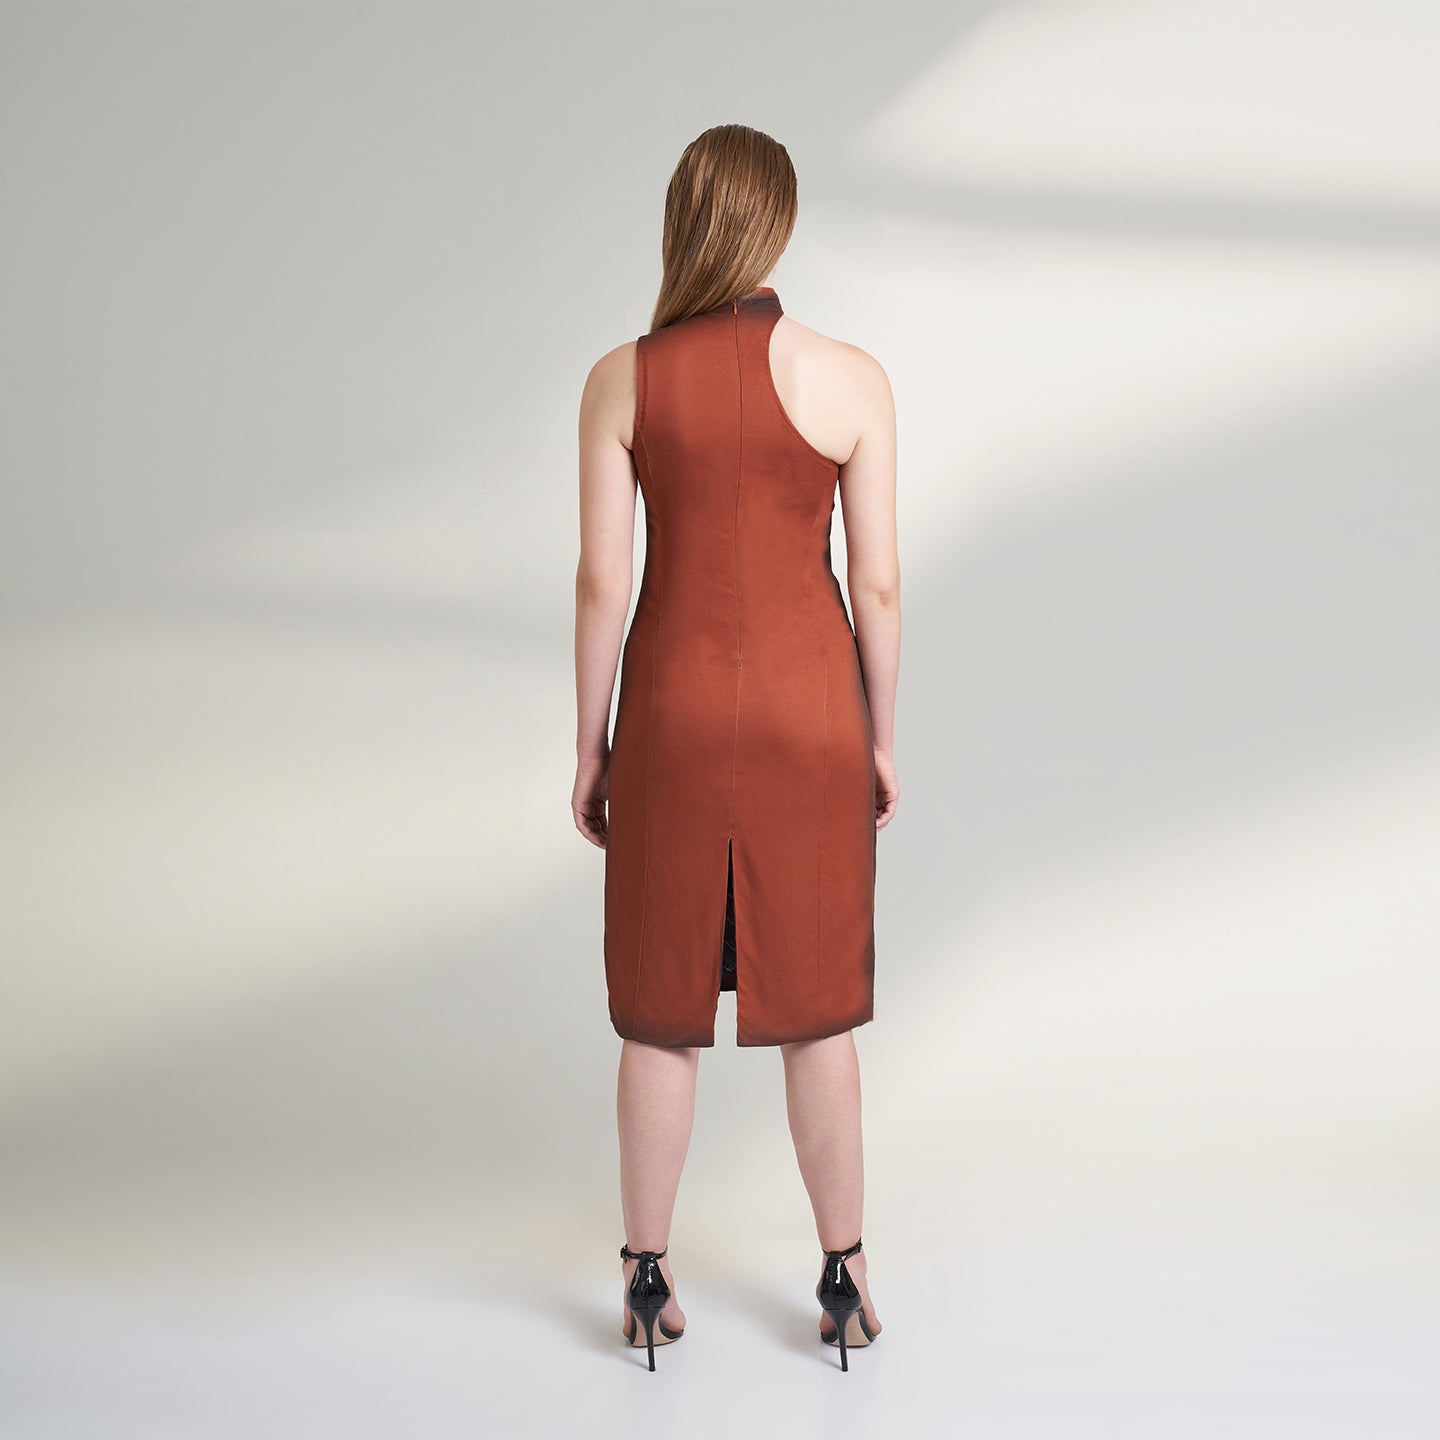 A global medium size model wearing a maroon wine dress with an asymmetrical neckline and a cut-work on left shoulder highlighted with ombre edges all over; crafted in organic lotus stem fabric.